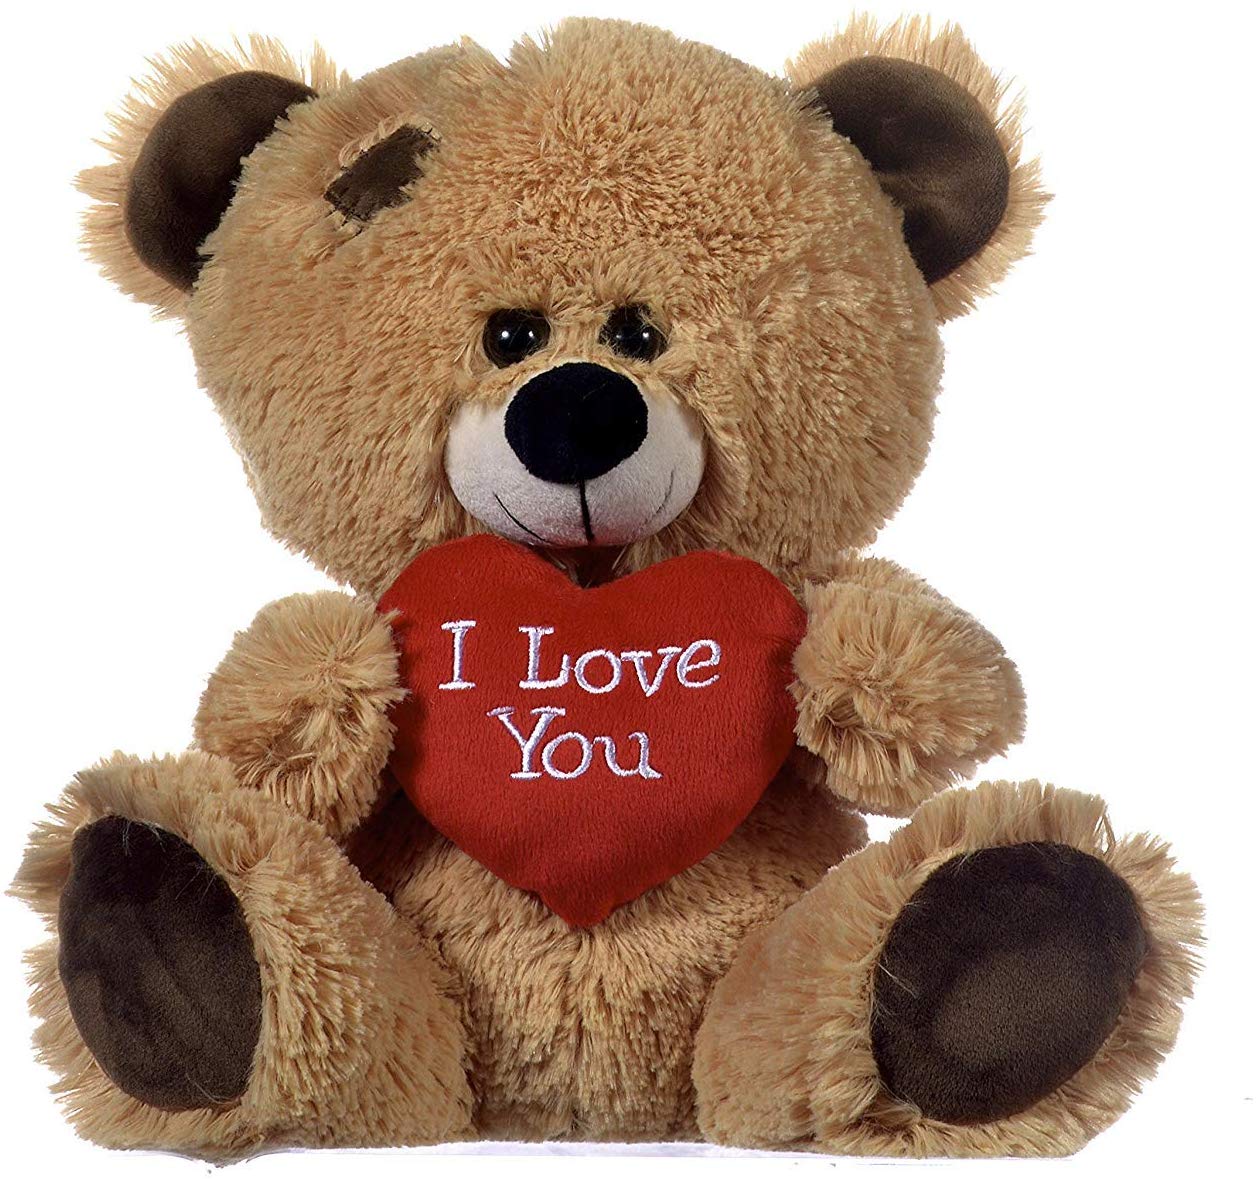 Brown Patchwork Teddy Bear holding Red Heart with "I Love You" written on it